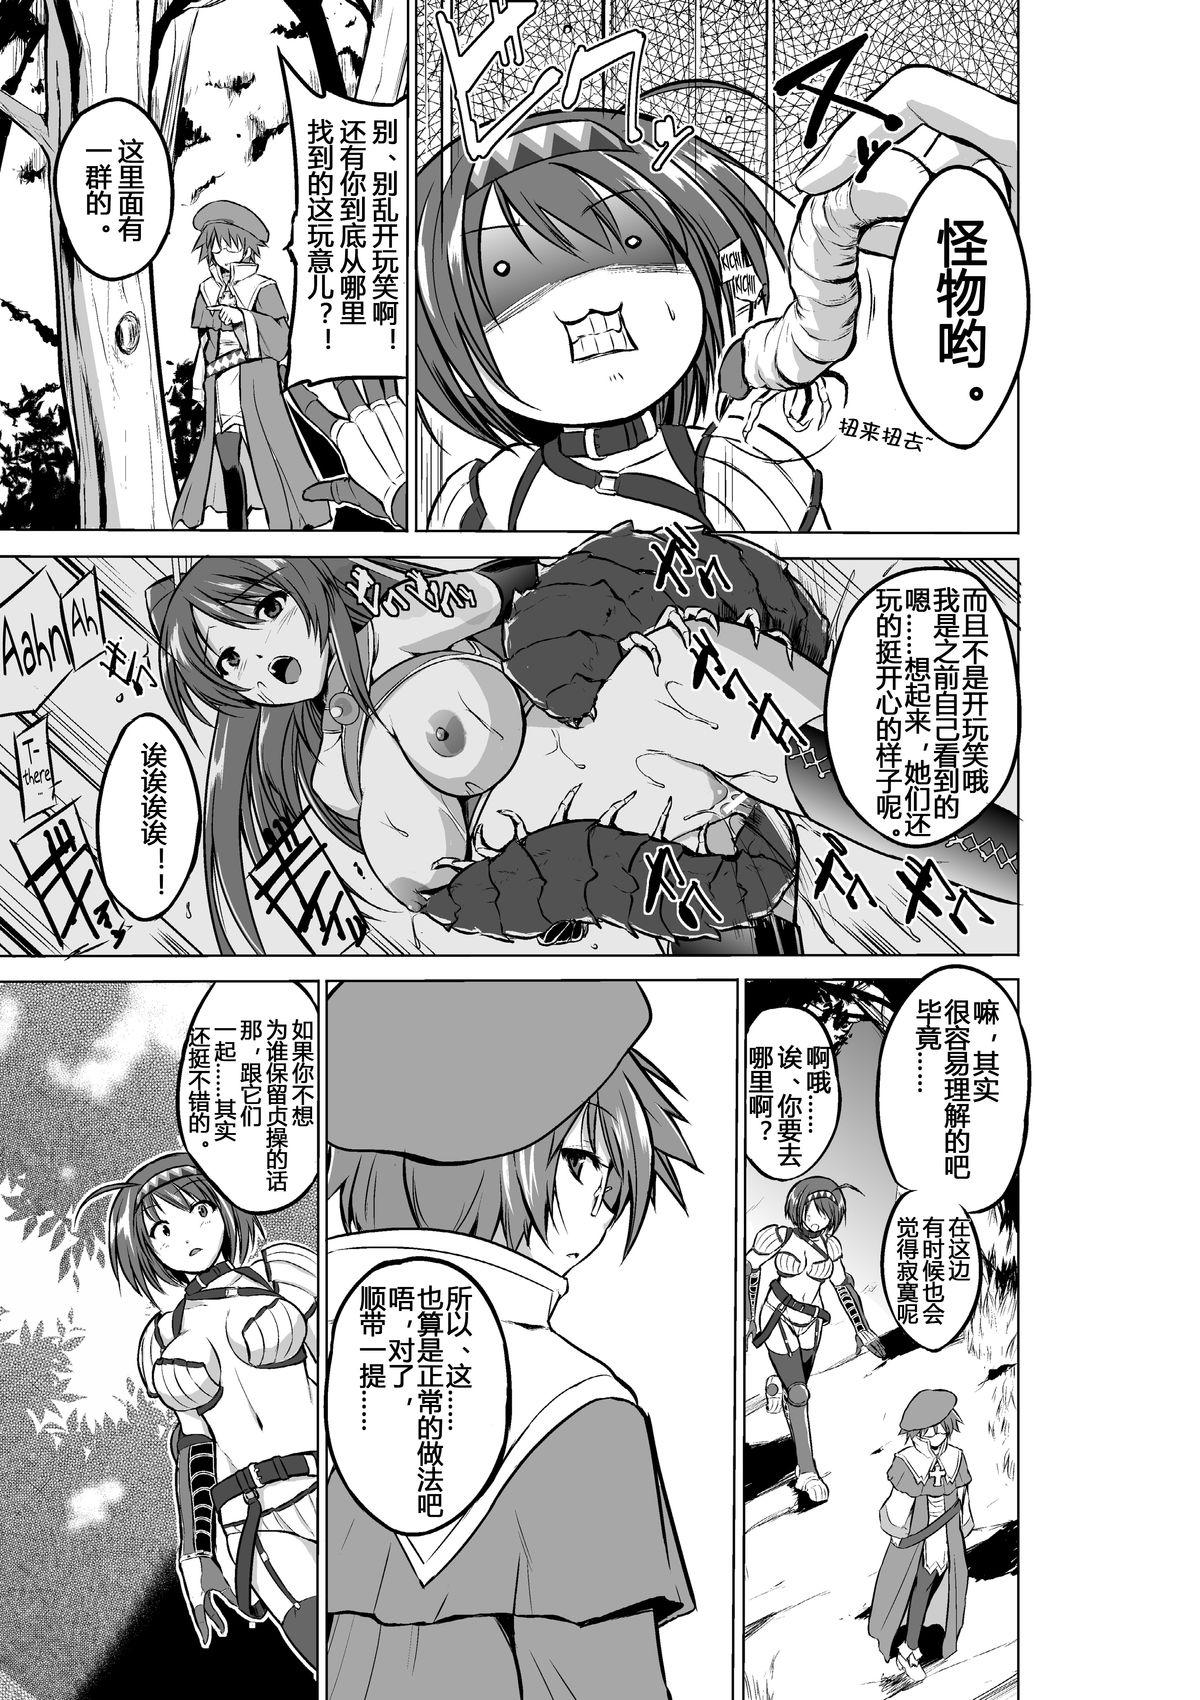 Old Man Dungeon Travelers - Chie no Himegoto - Toheart2 Porno - Page 5